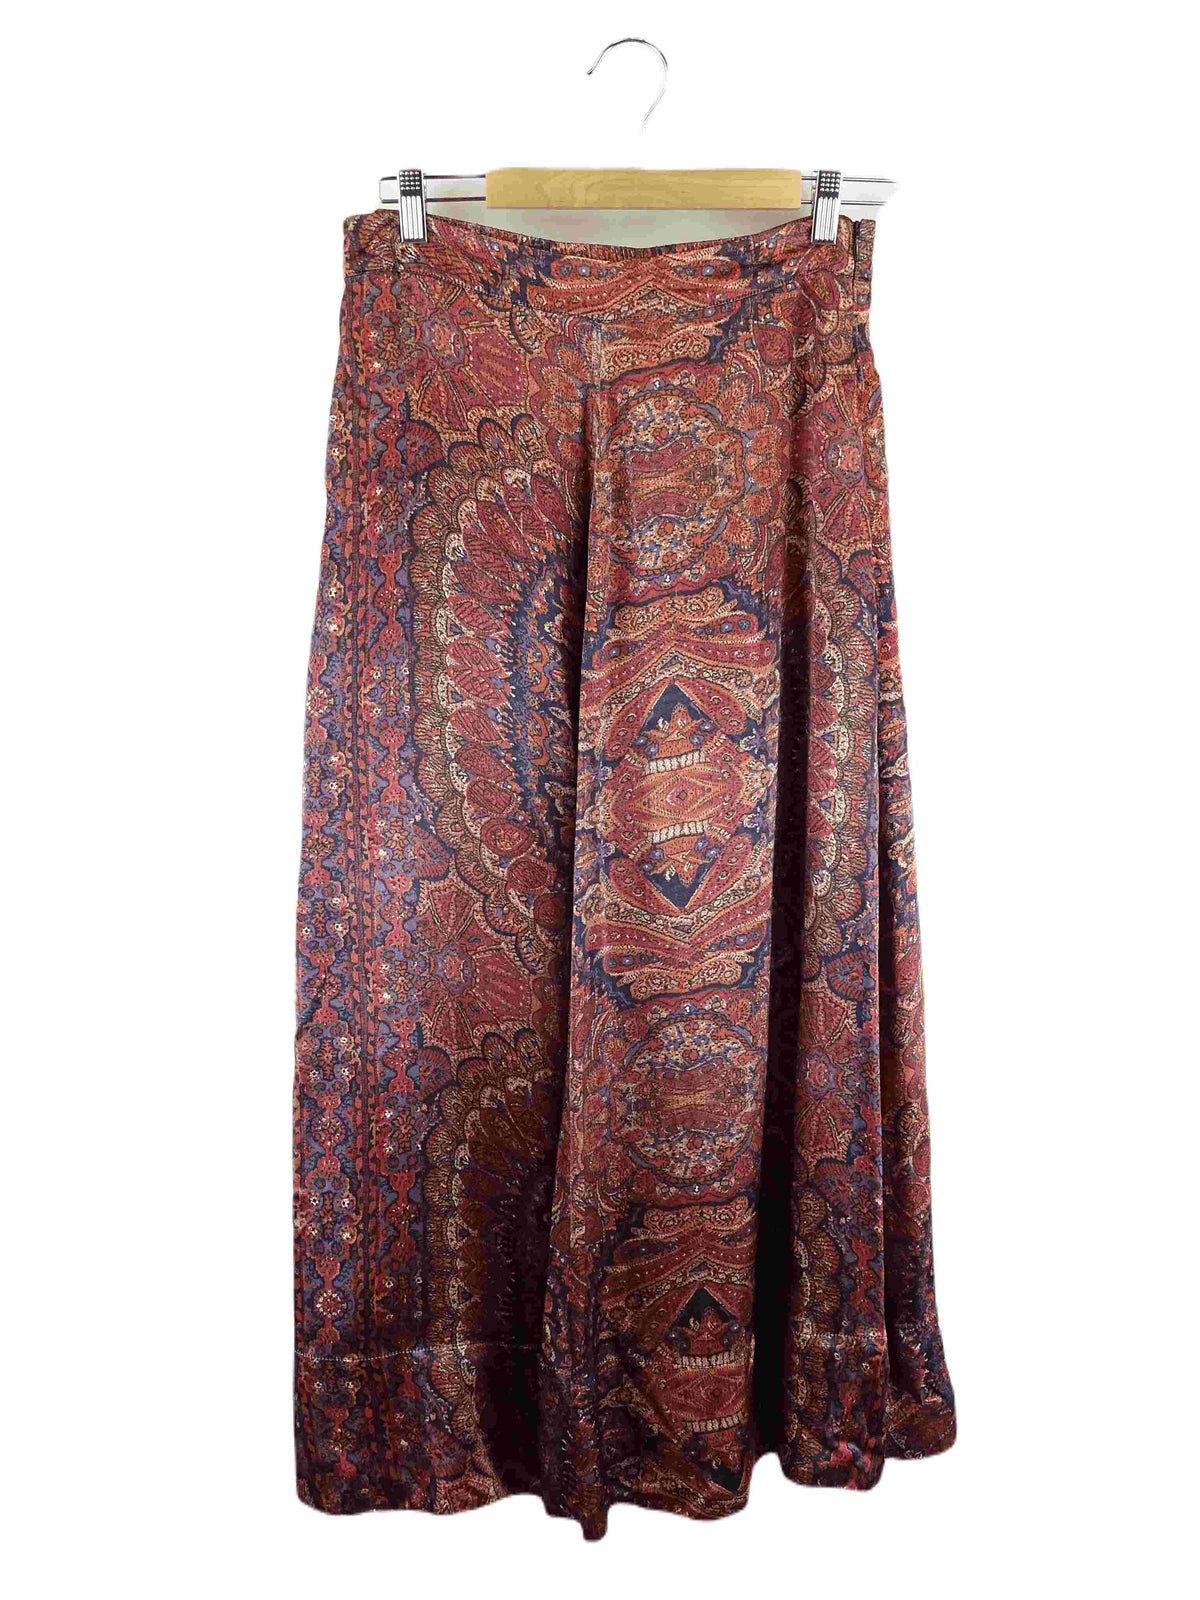 By Timo Red Multi Print Maxi Skirt S